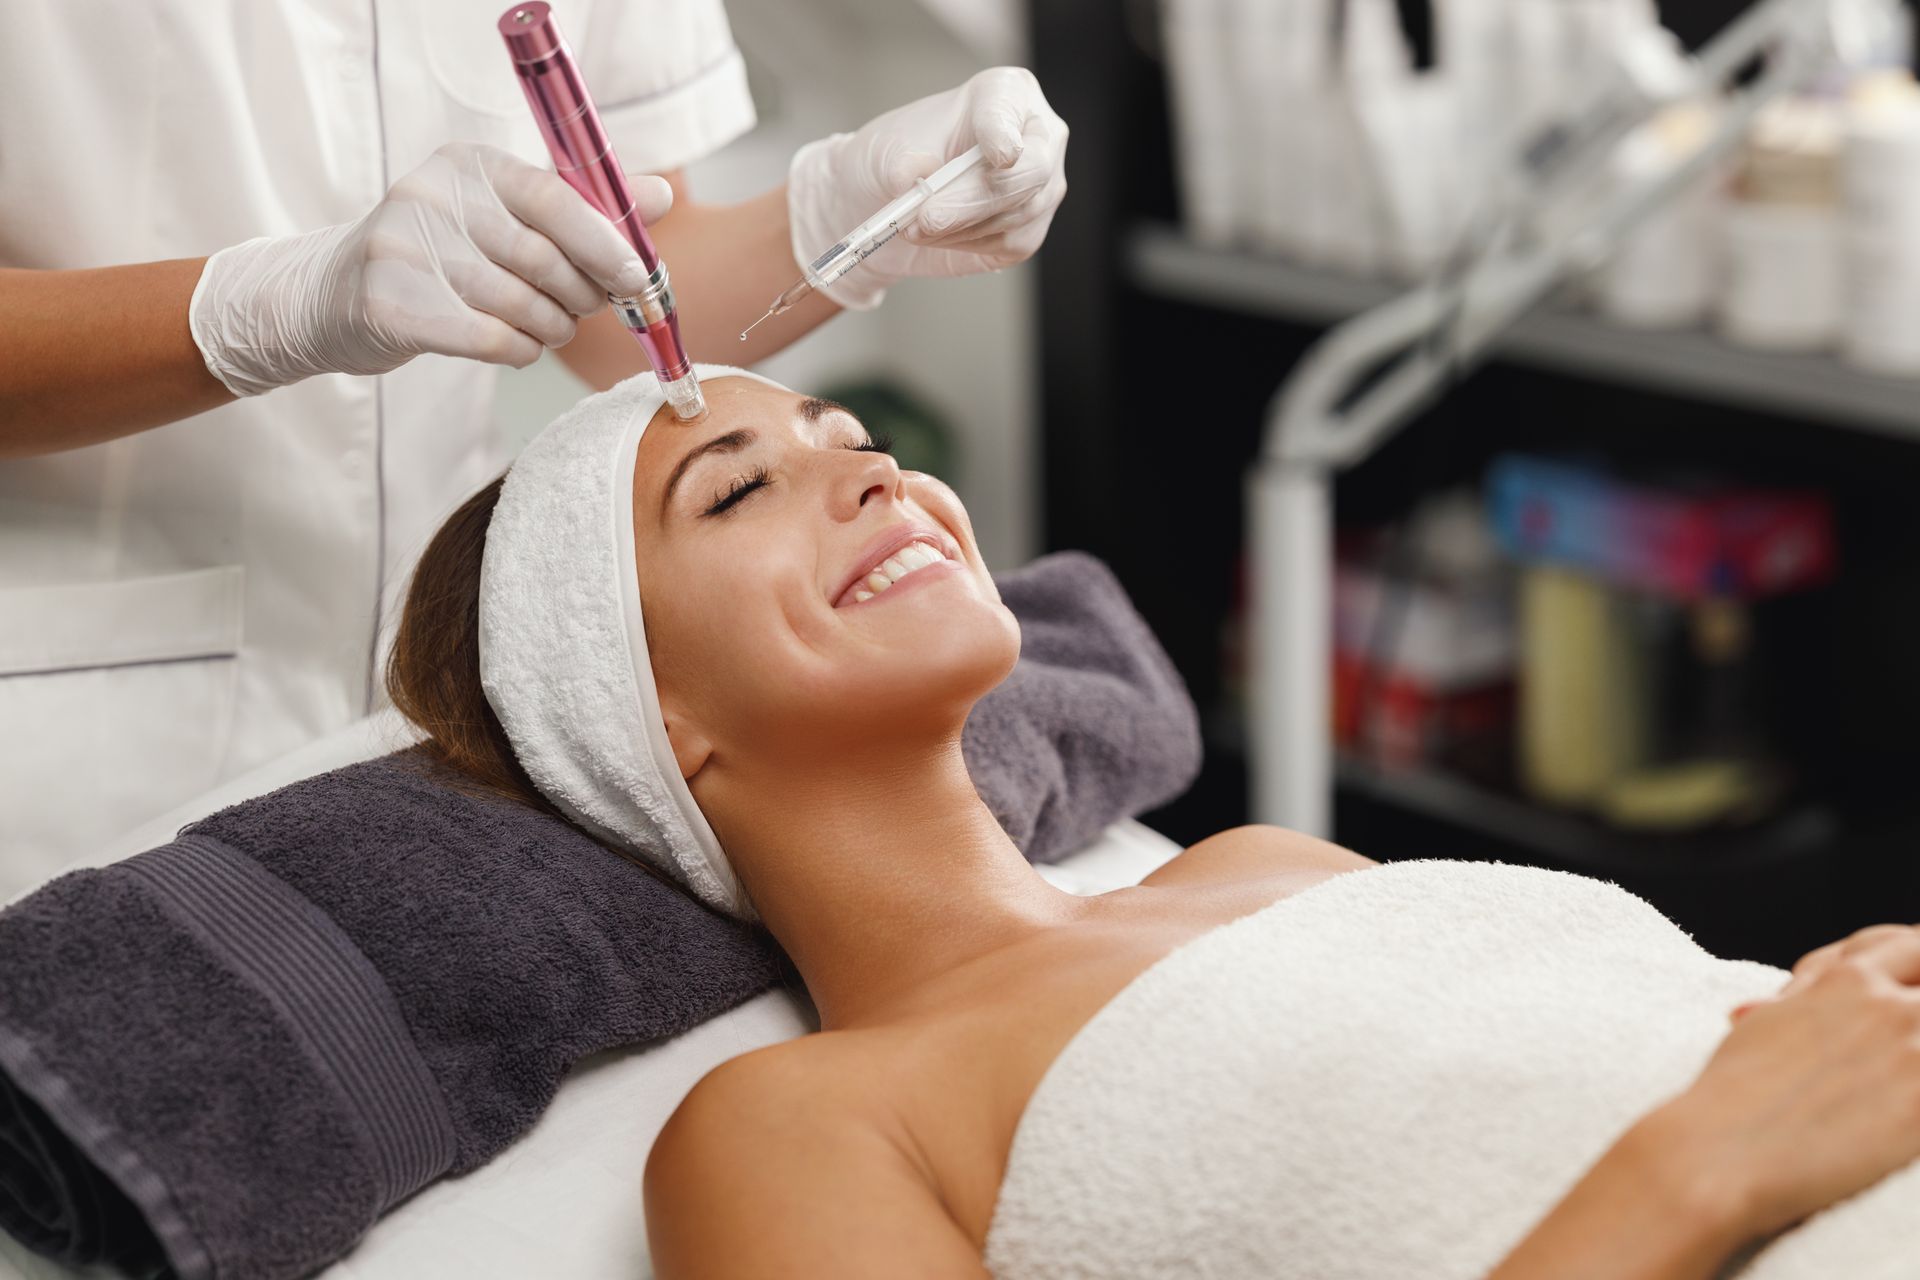 a woman is smiling while getting a treatment on her face